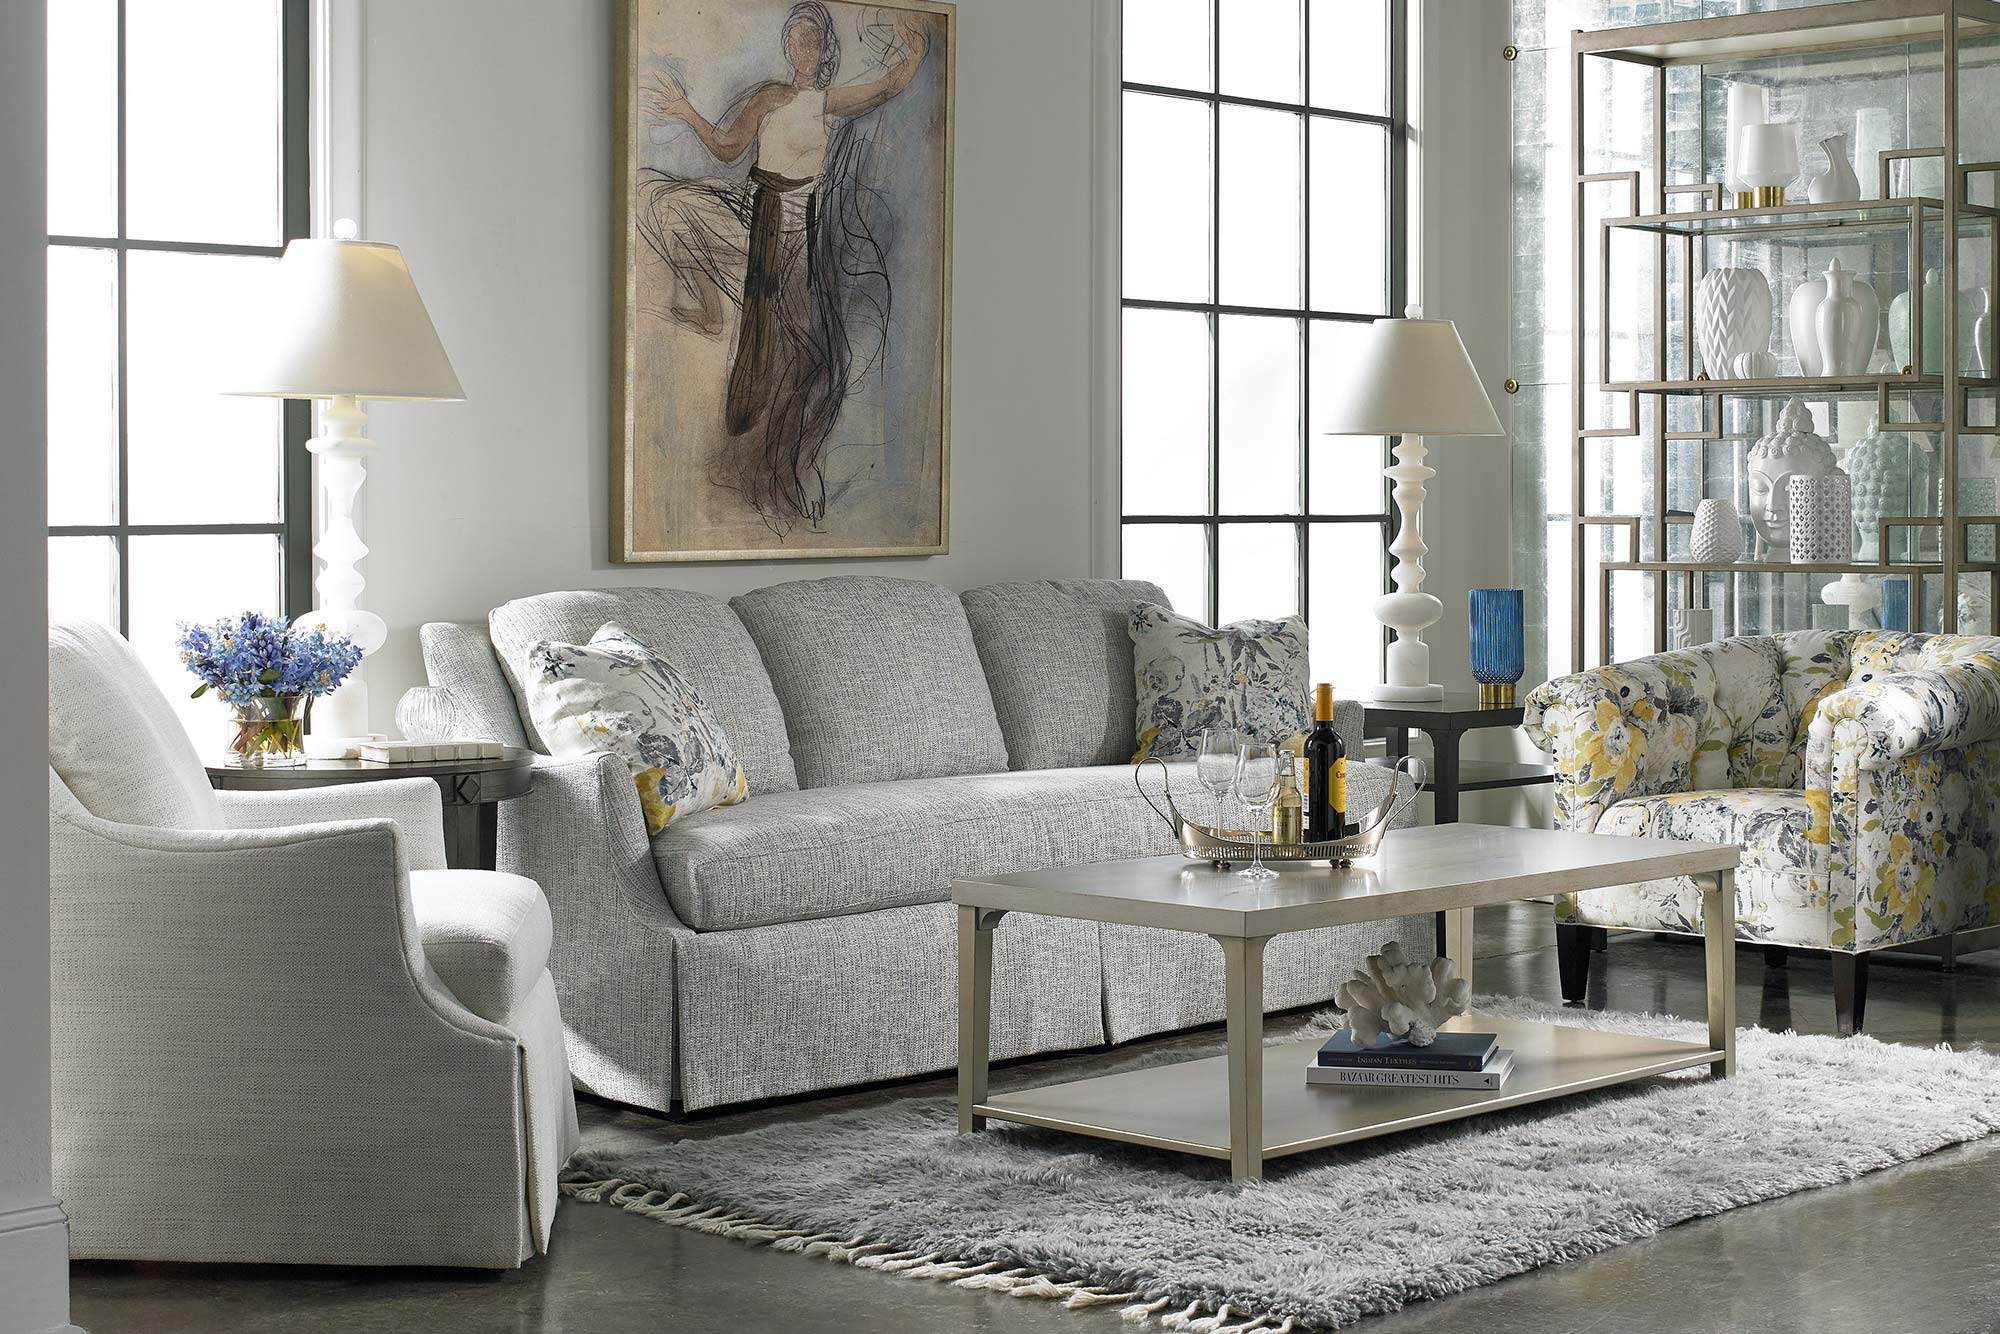 living room with fabric skirted sofa and two accent chairs around a rectangular coffee table over an area rug